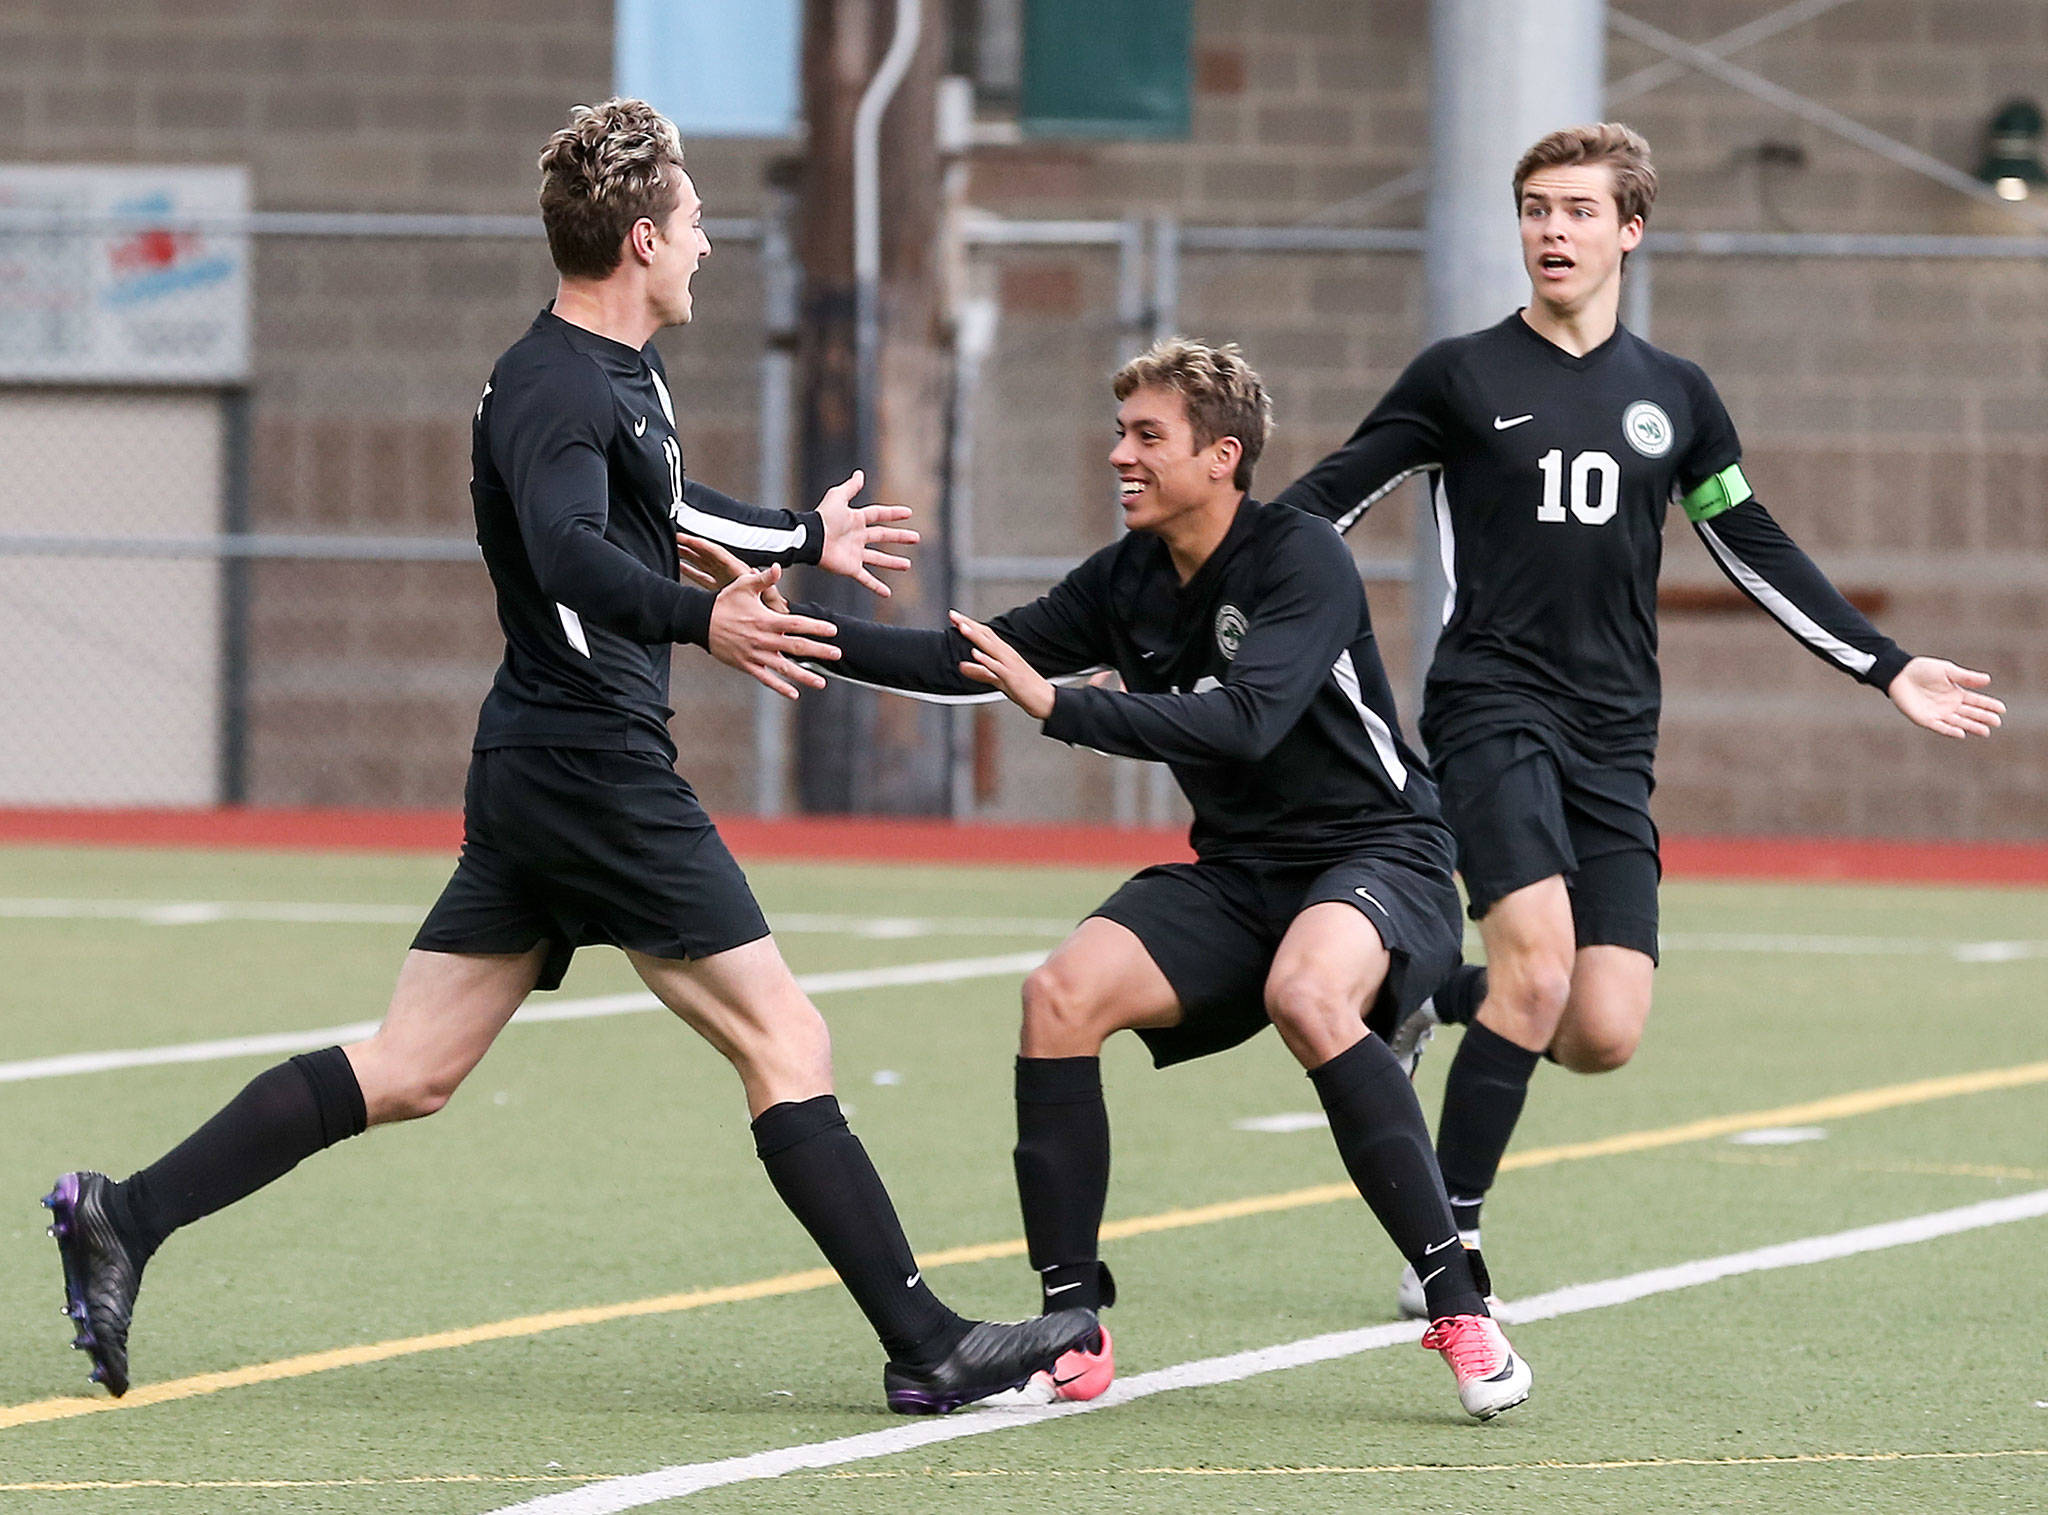 The Jackson boys soccer team advanced to the state semifinals for the first time in program history. (Kevin Clark / Herald file)